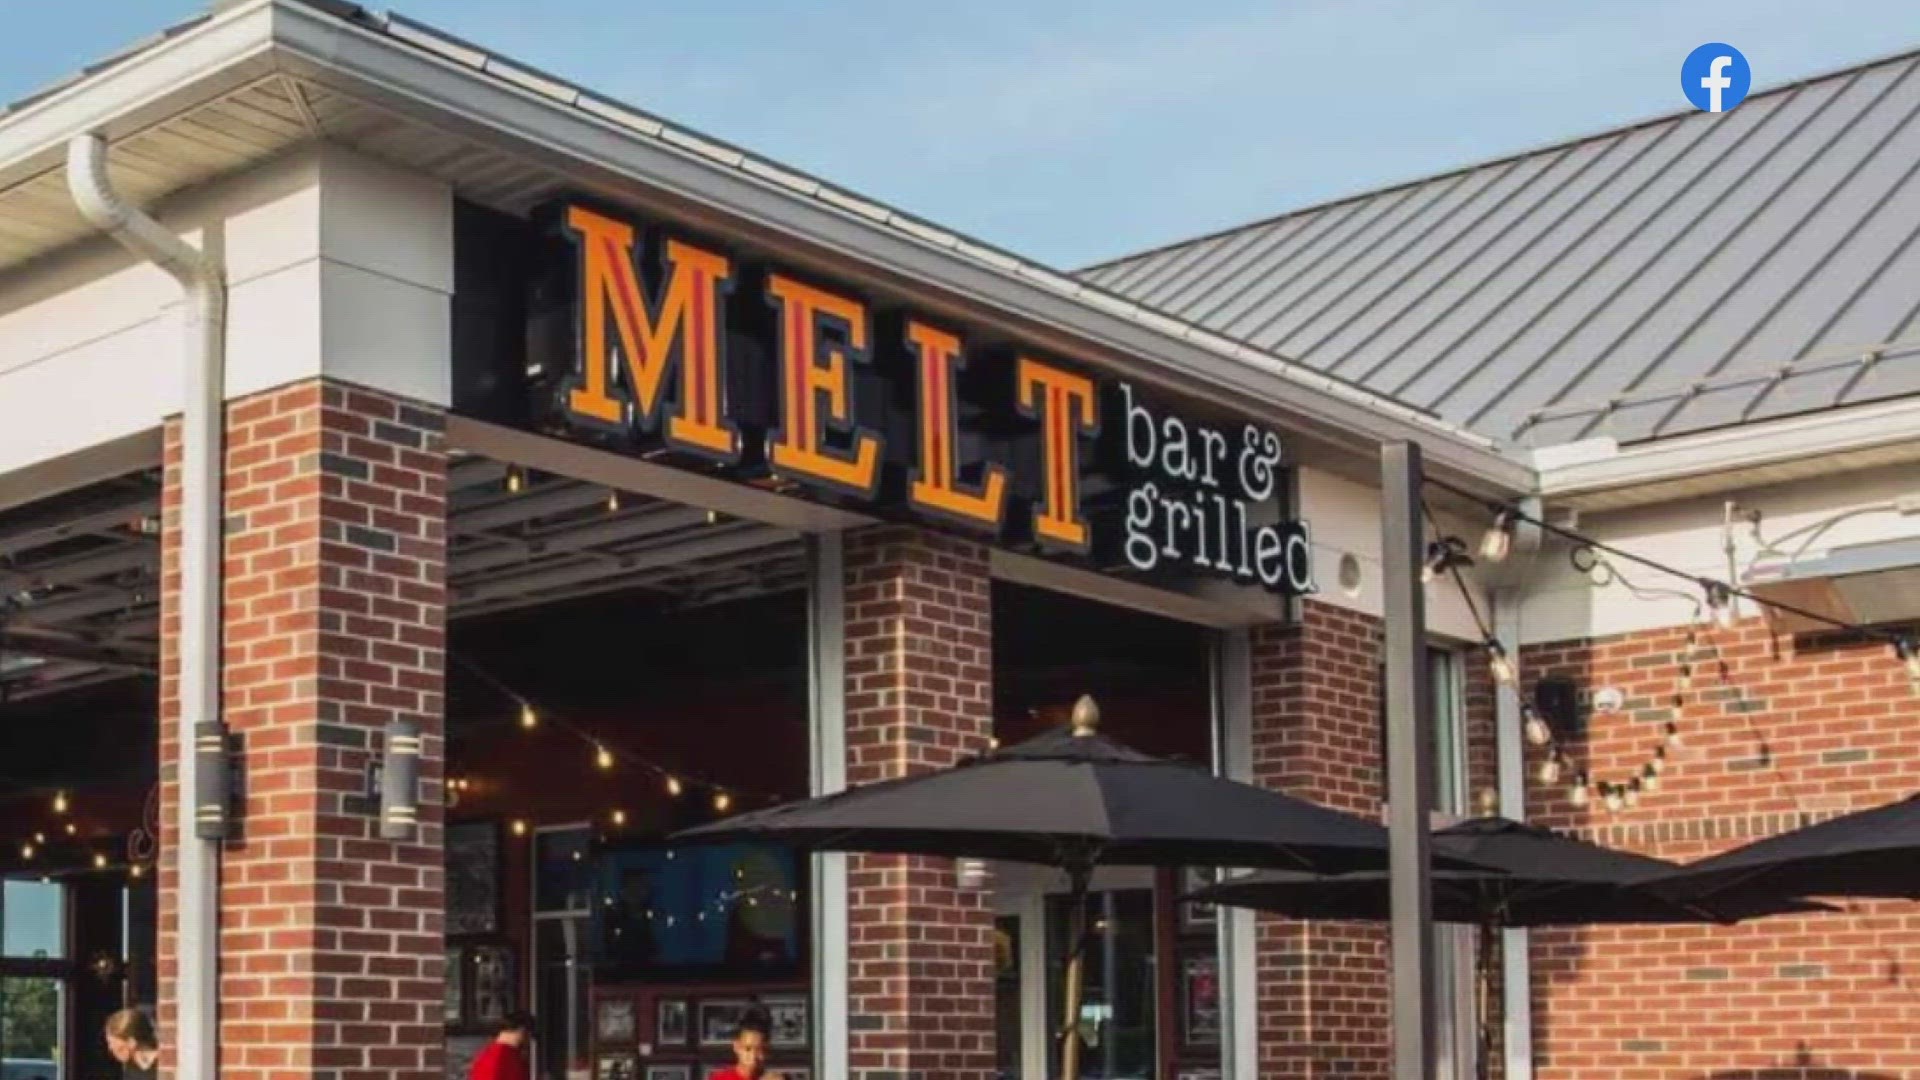 In a release, Melt announced that owner Matt Fish and his team have permanently closed the Avon location on Detroit Road, effective Tuesday, Jan. 2, 2024.